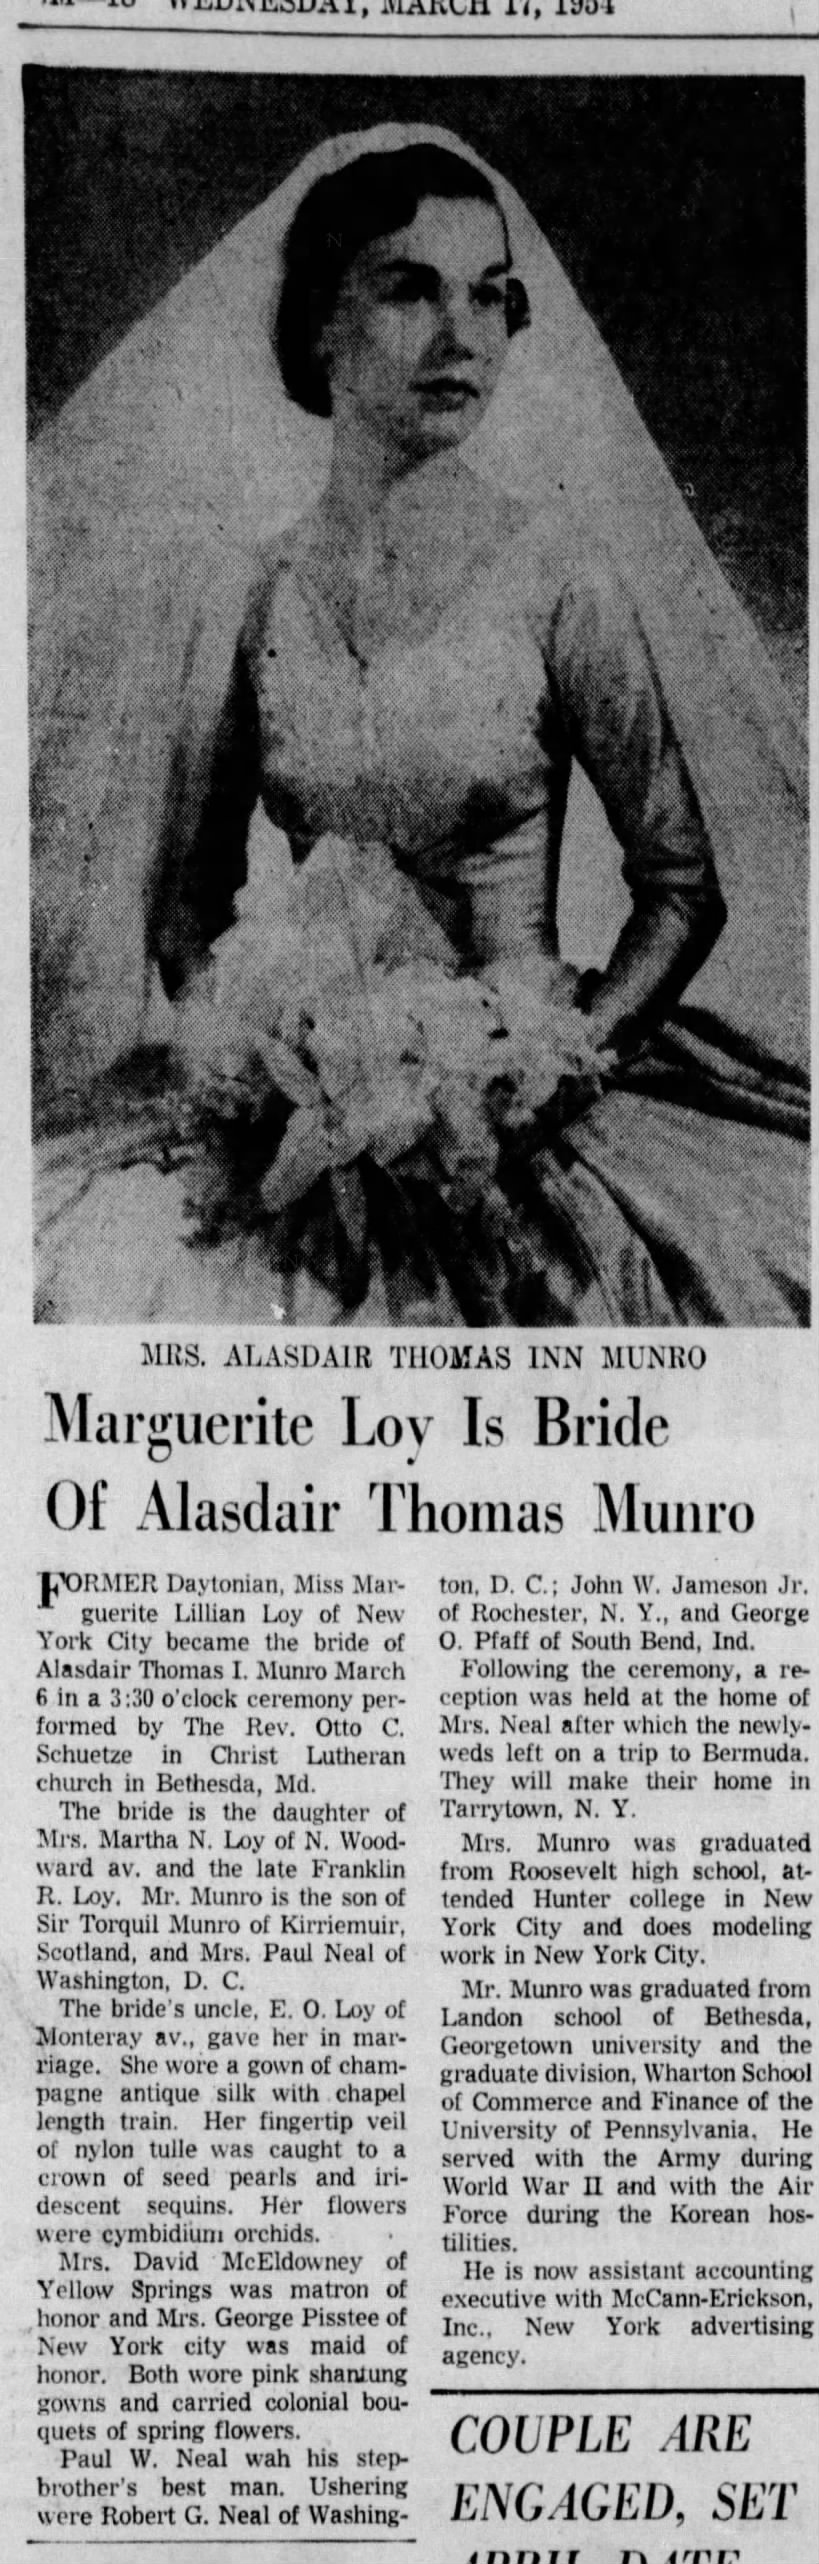 Marriage of Loy / Munro